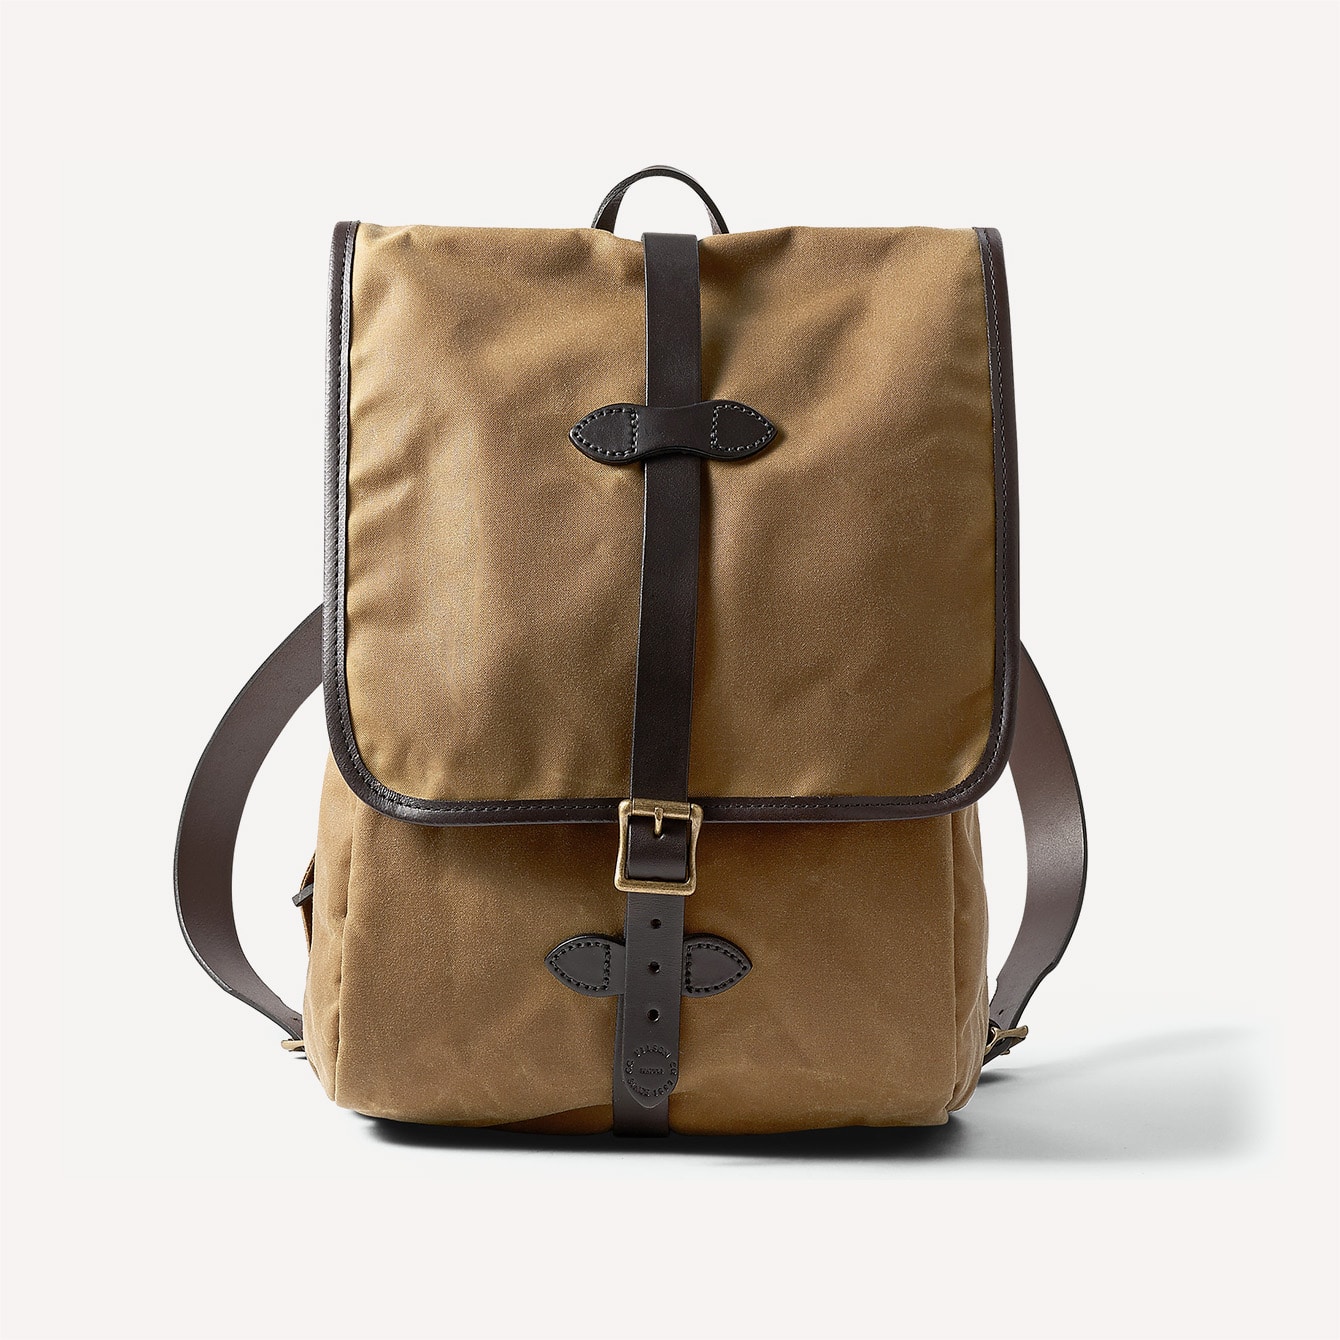 17 Most Functional and Stylish Men’s Backpacks [2022 Guide]